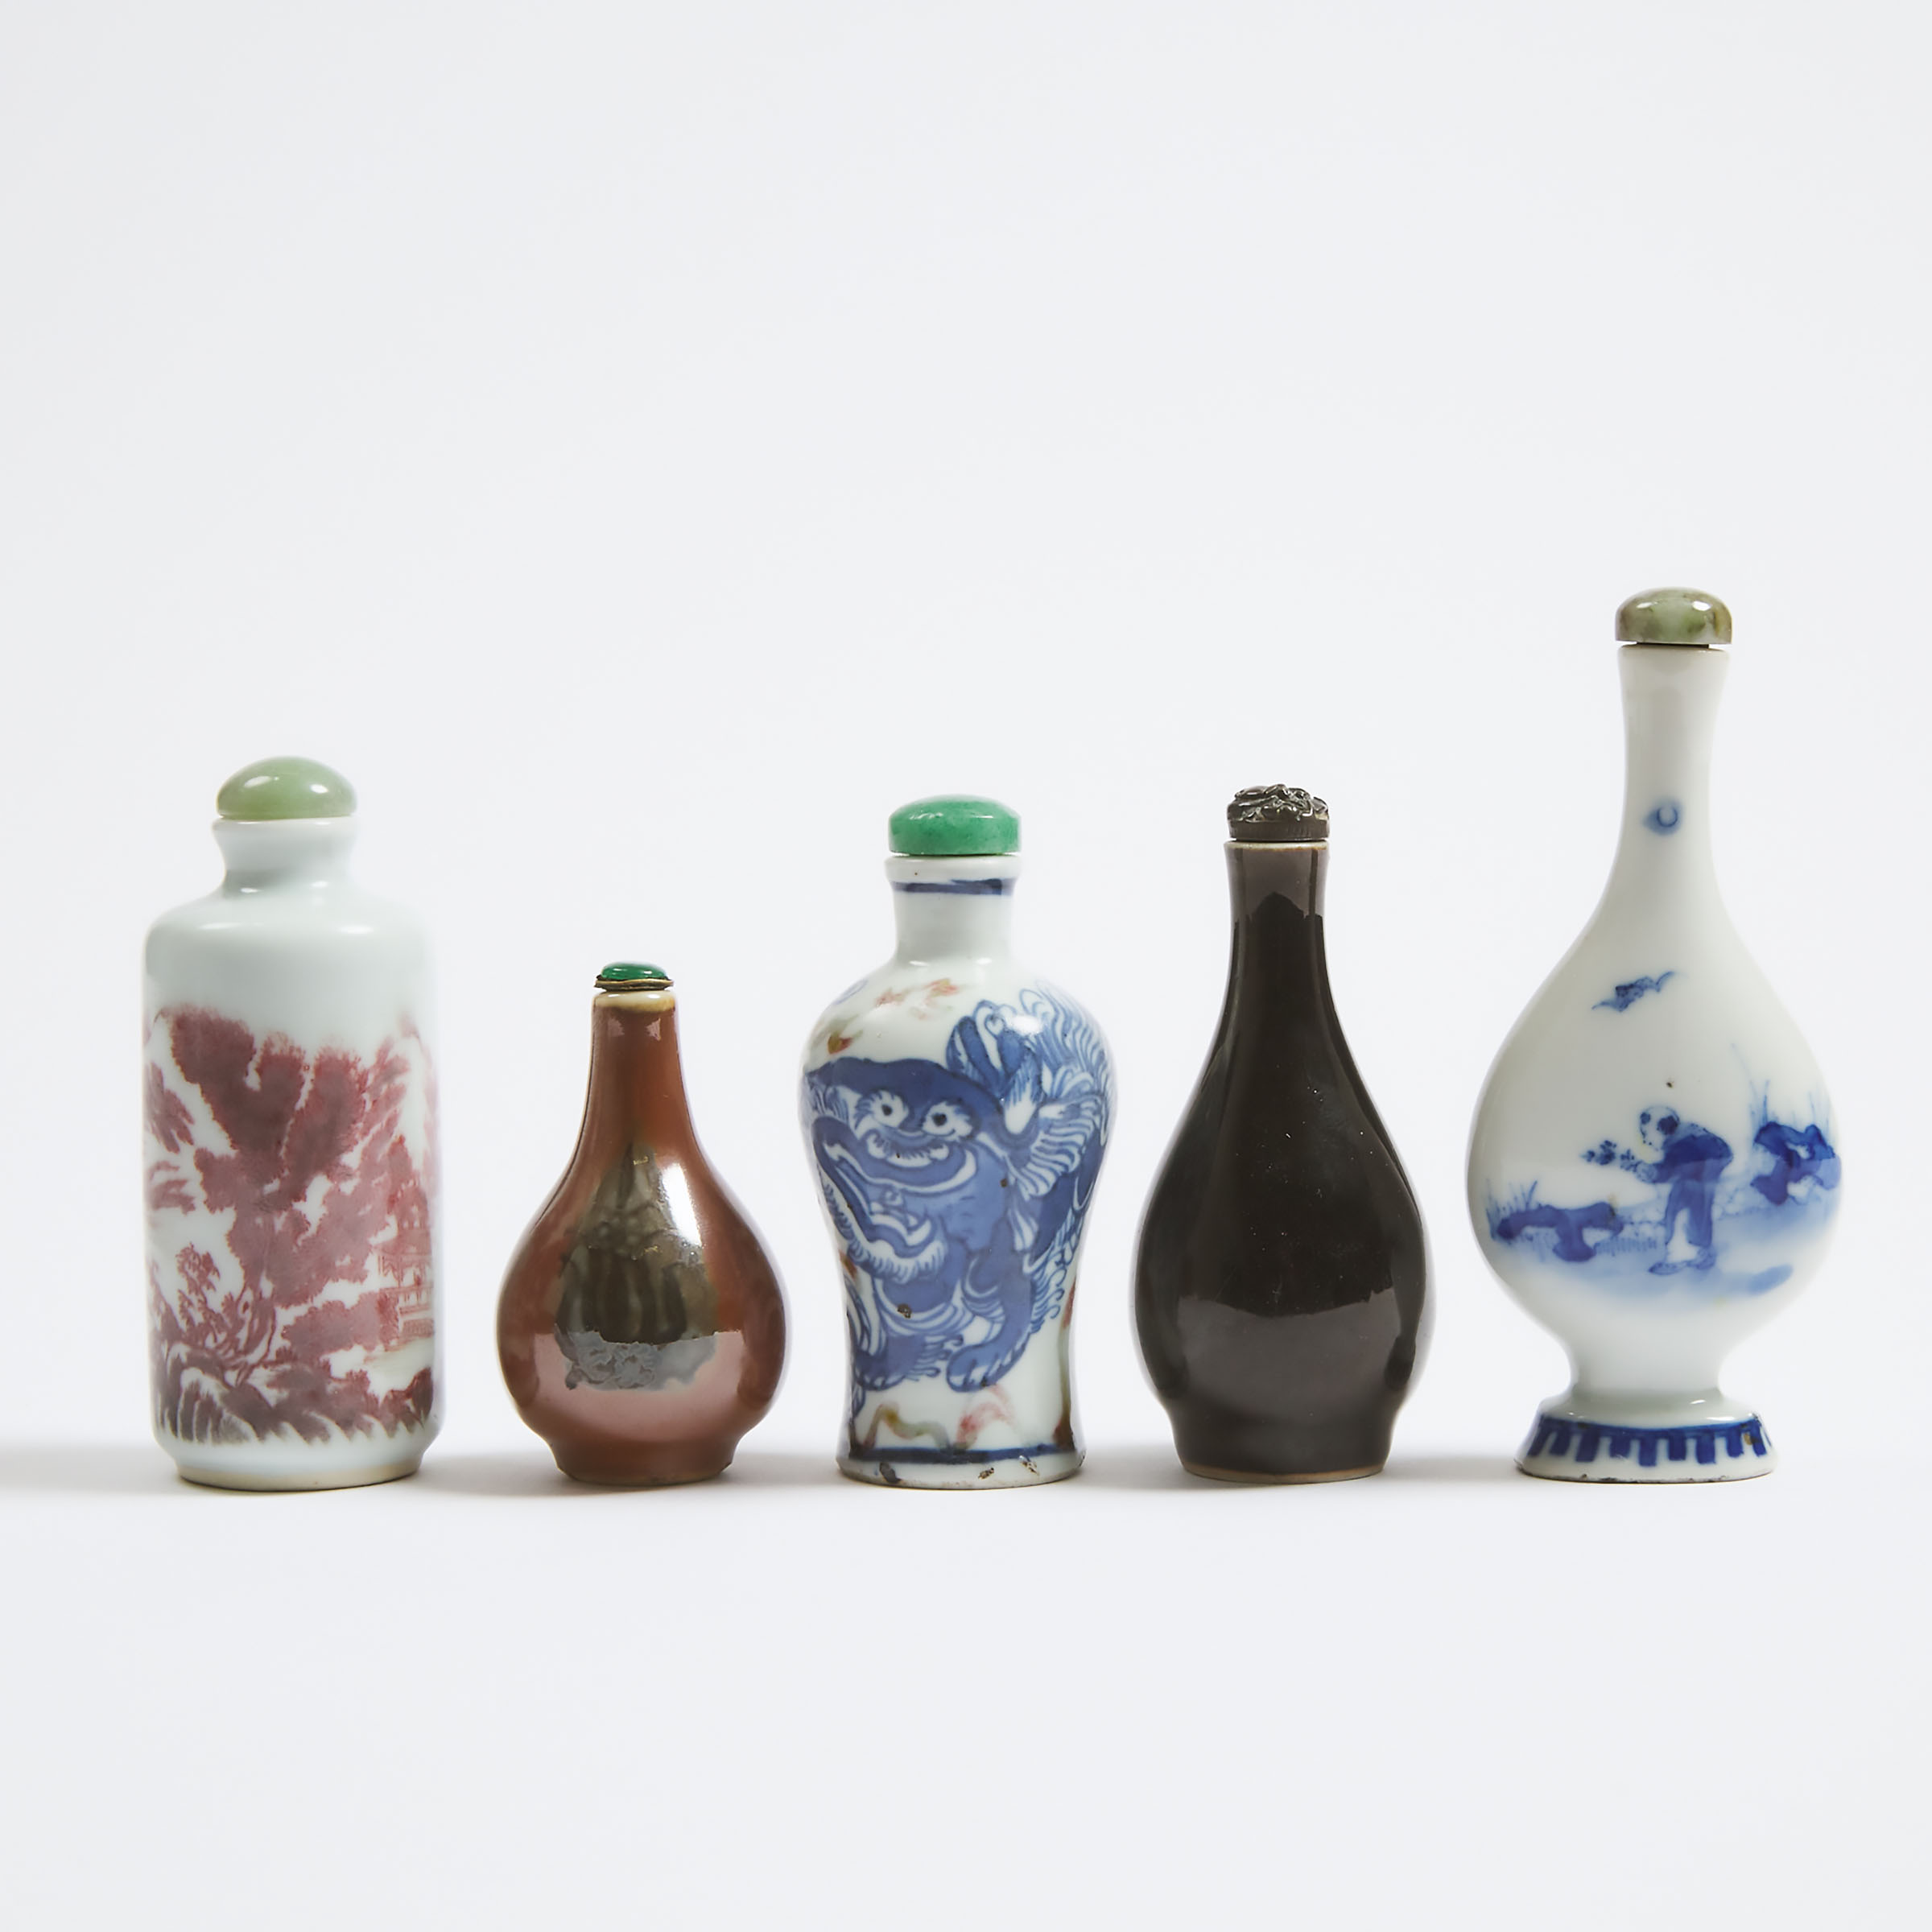 A Group of Five Porcelain Snuff Bottles, Qing Dynasty, 19th Century